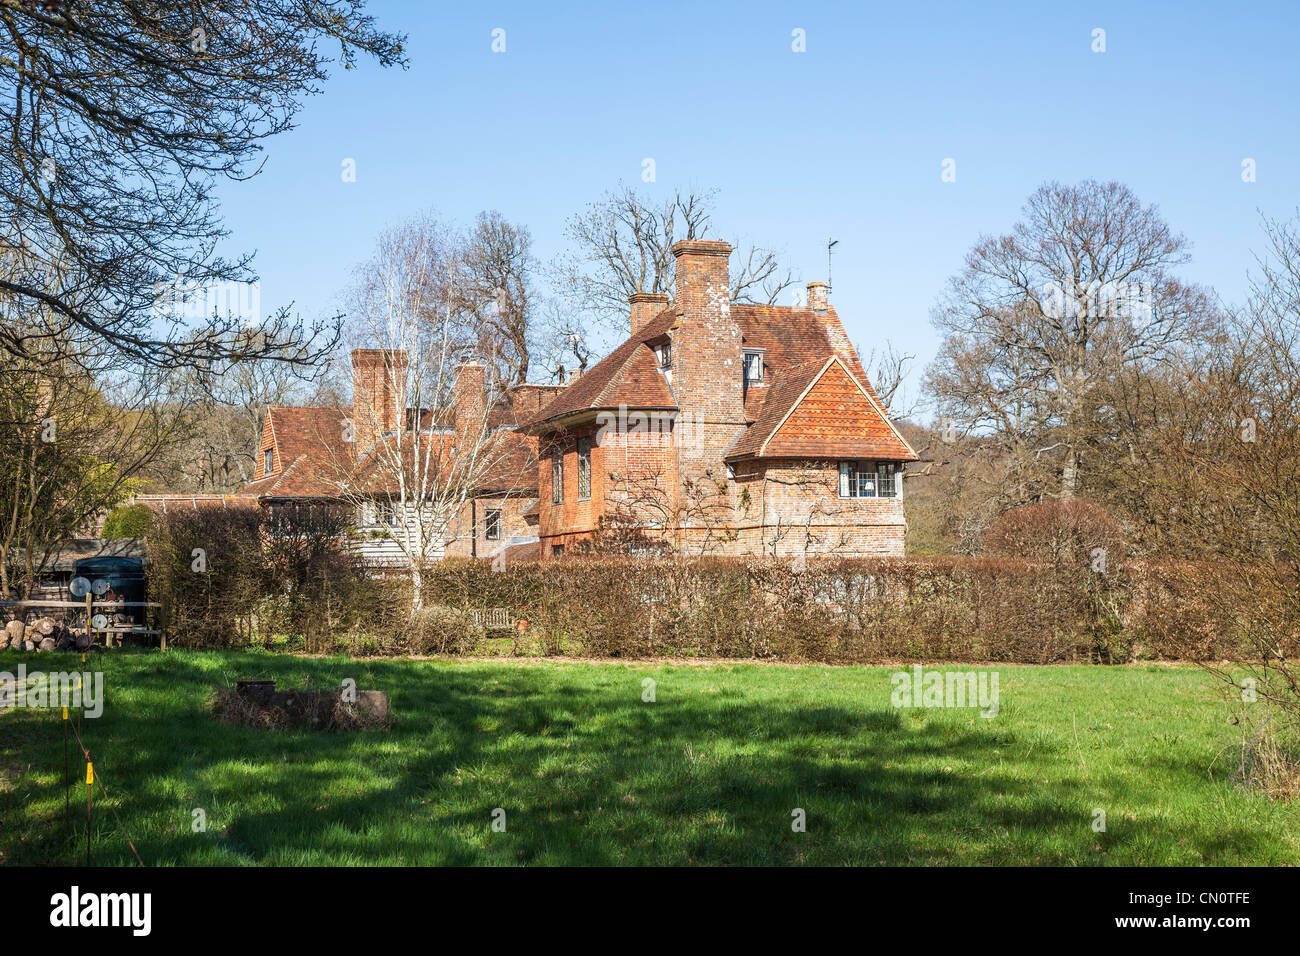 Prime UK real estate: Vann House, Hambledon, Godalming, Surrey, England, UK a property with gardens laid out by famous garden designer Gertrude Jekyll Stock Photo